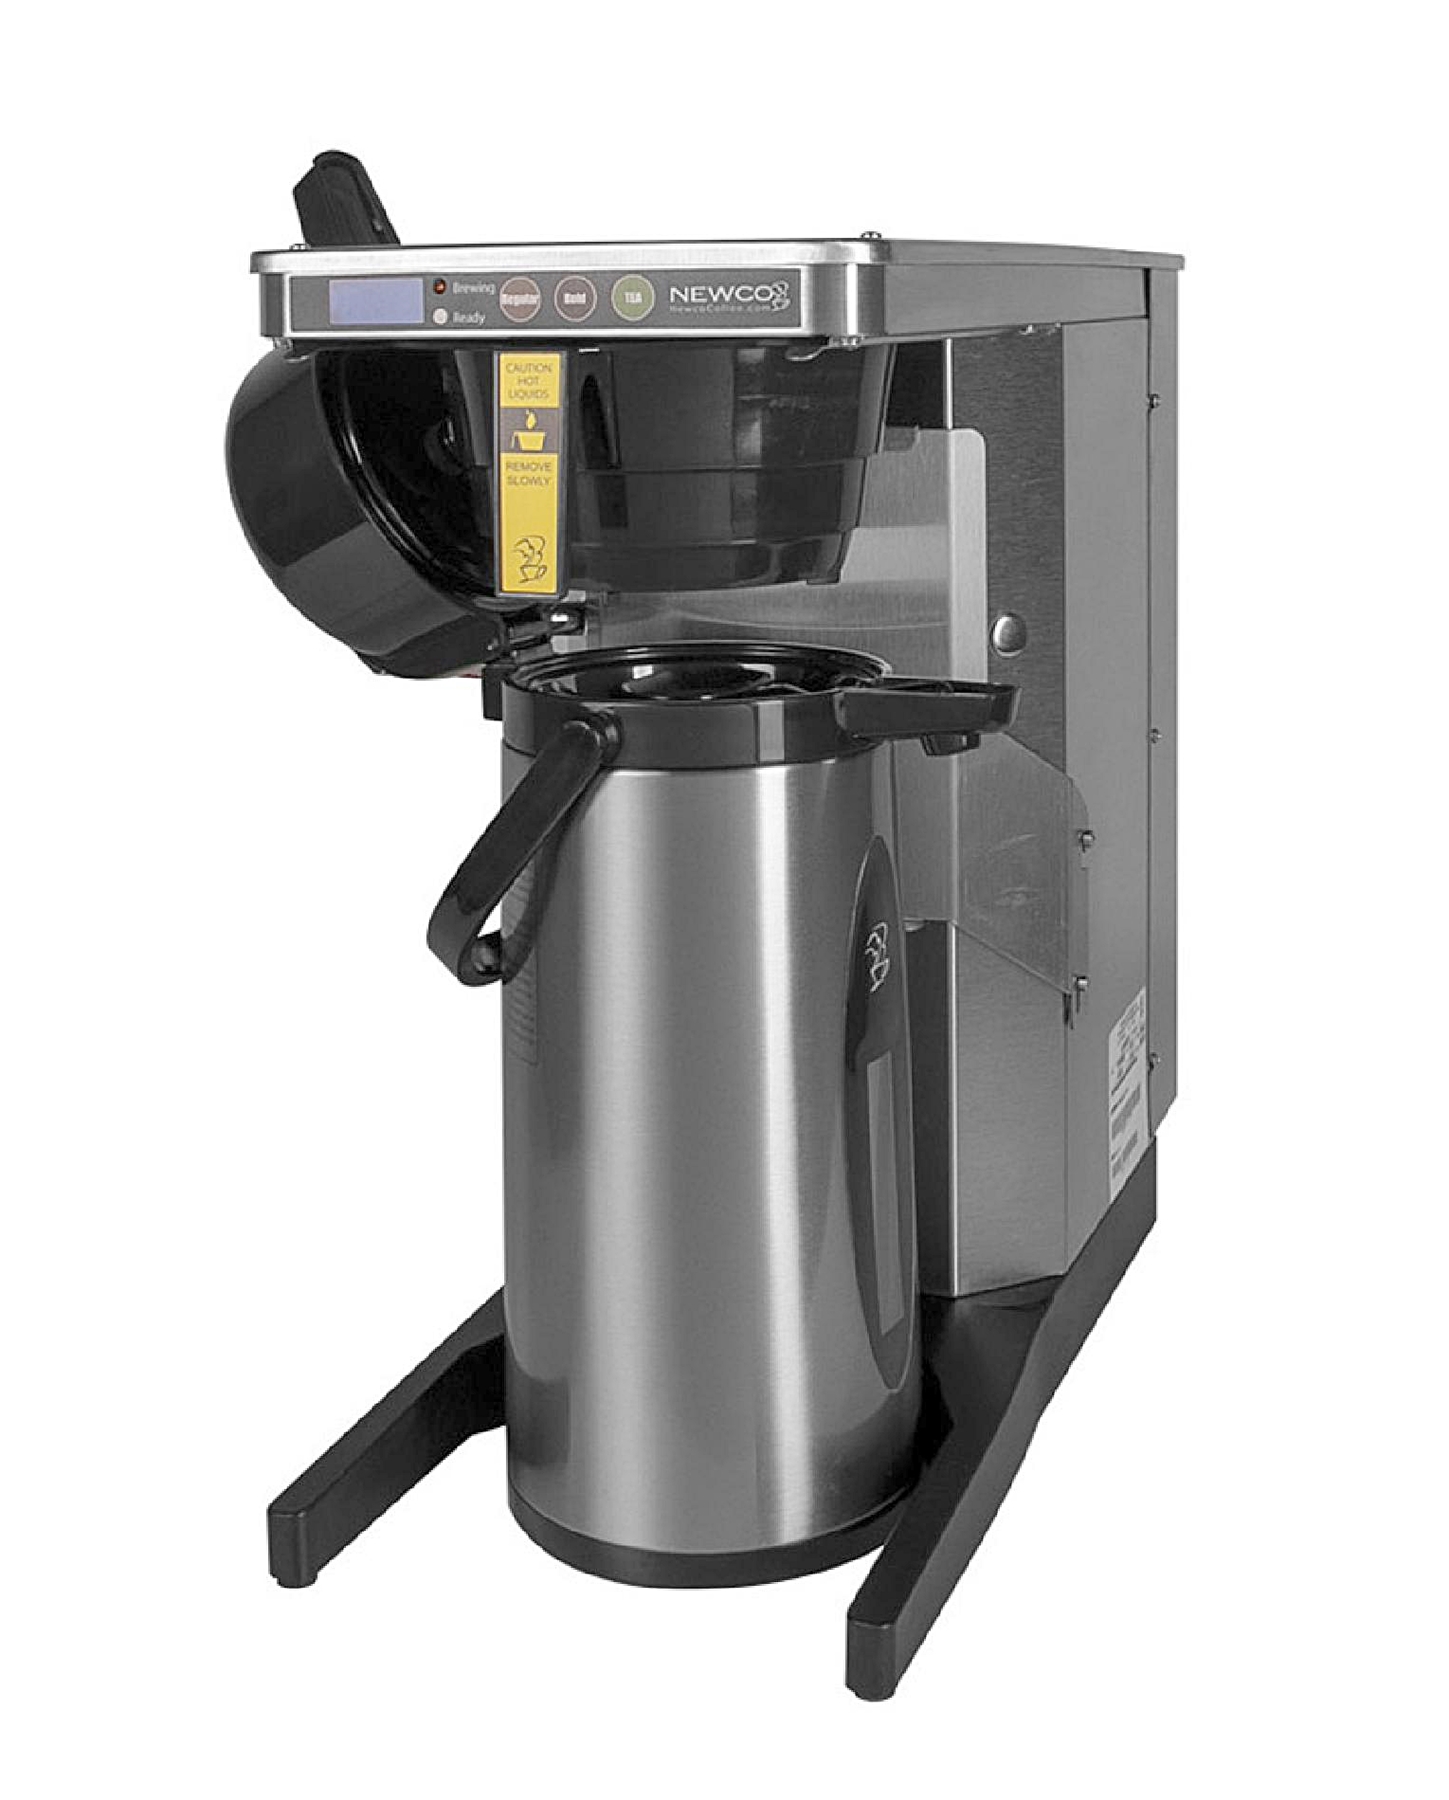 Newco 119730 20:1 AP Pro Combo Coffee/Tea Brewer [Newco 119730 20:1 AP Pro  Combo] - $839.50 : Discount Coffee Equipment, Discount Coffee Equipment -  Commercial Beverage Supplies